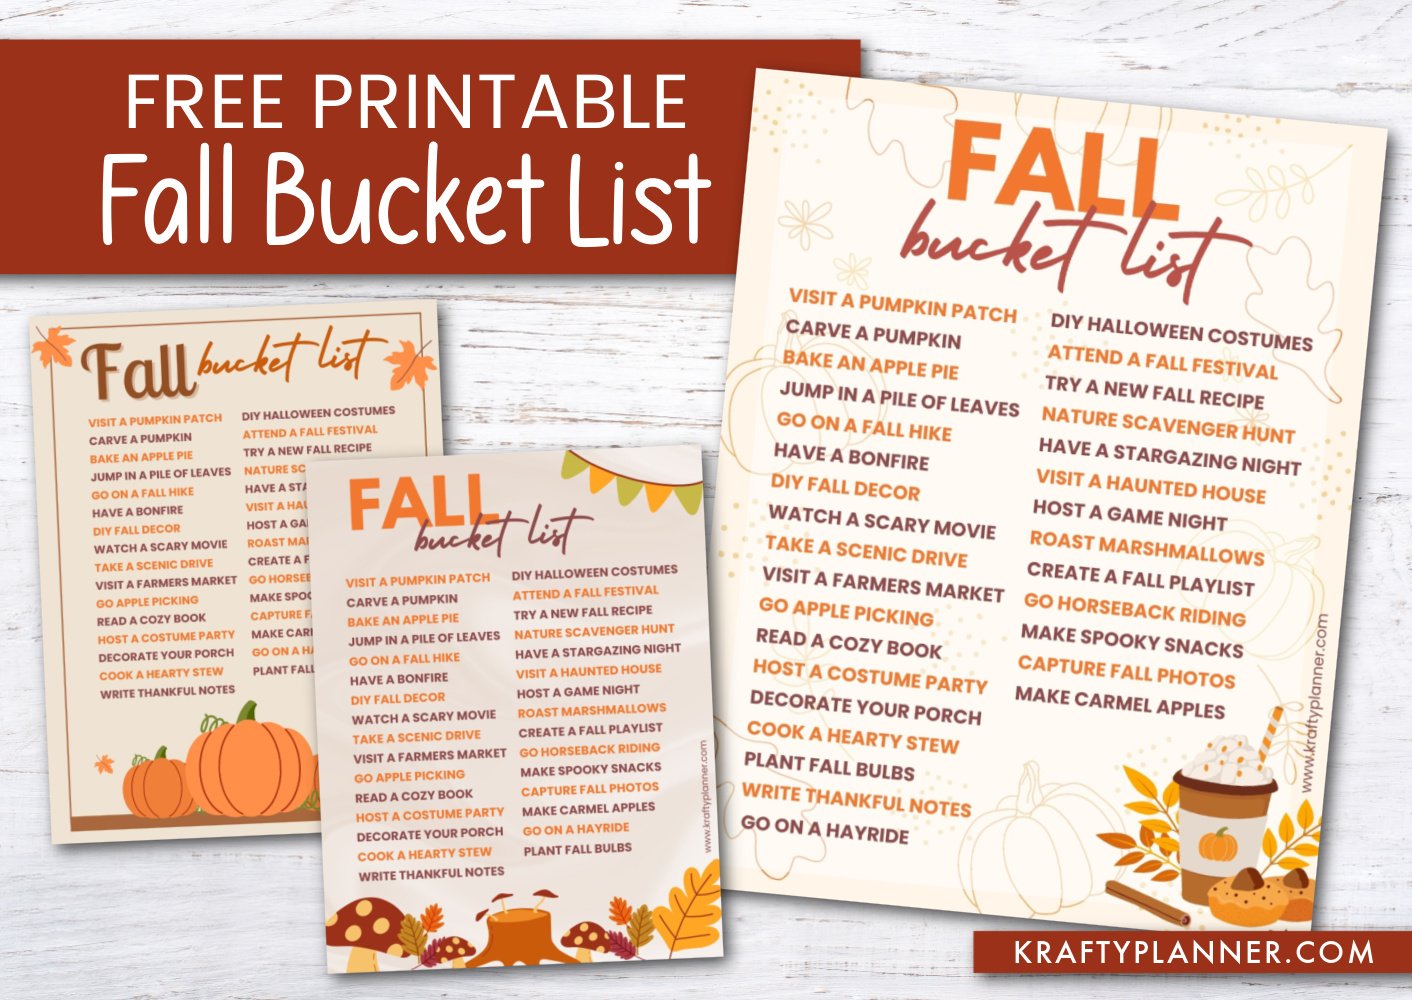 Fall Bucket List Free Printable: Get Ready for Cozy Adventures!